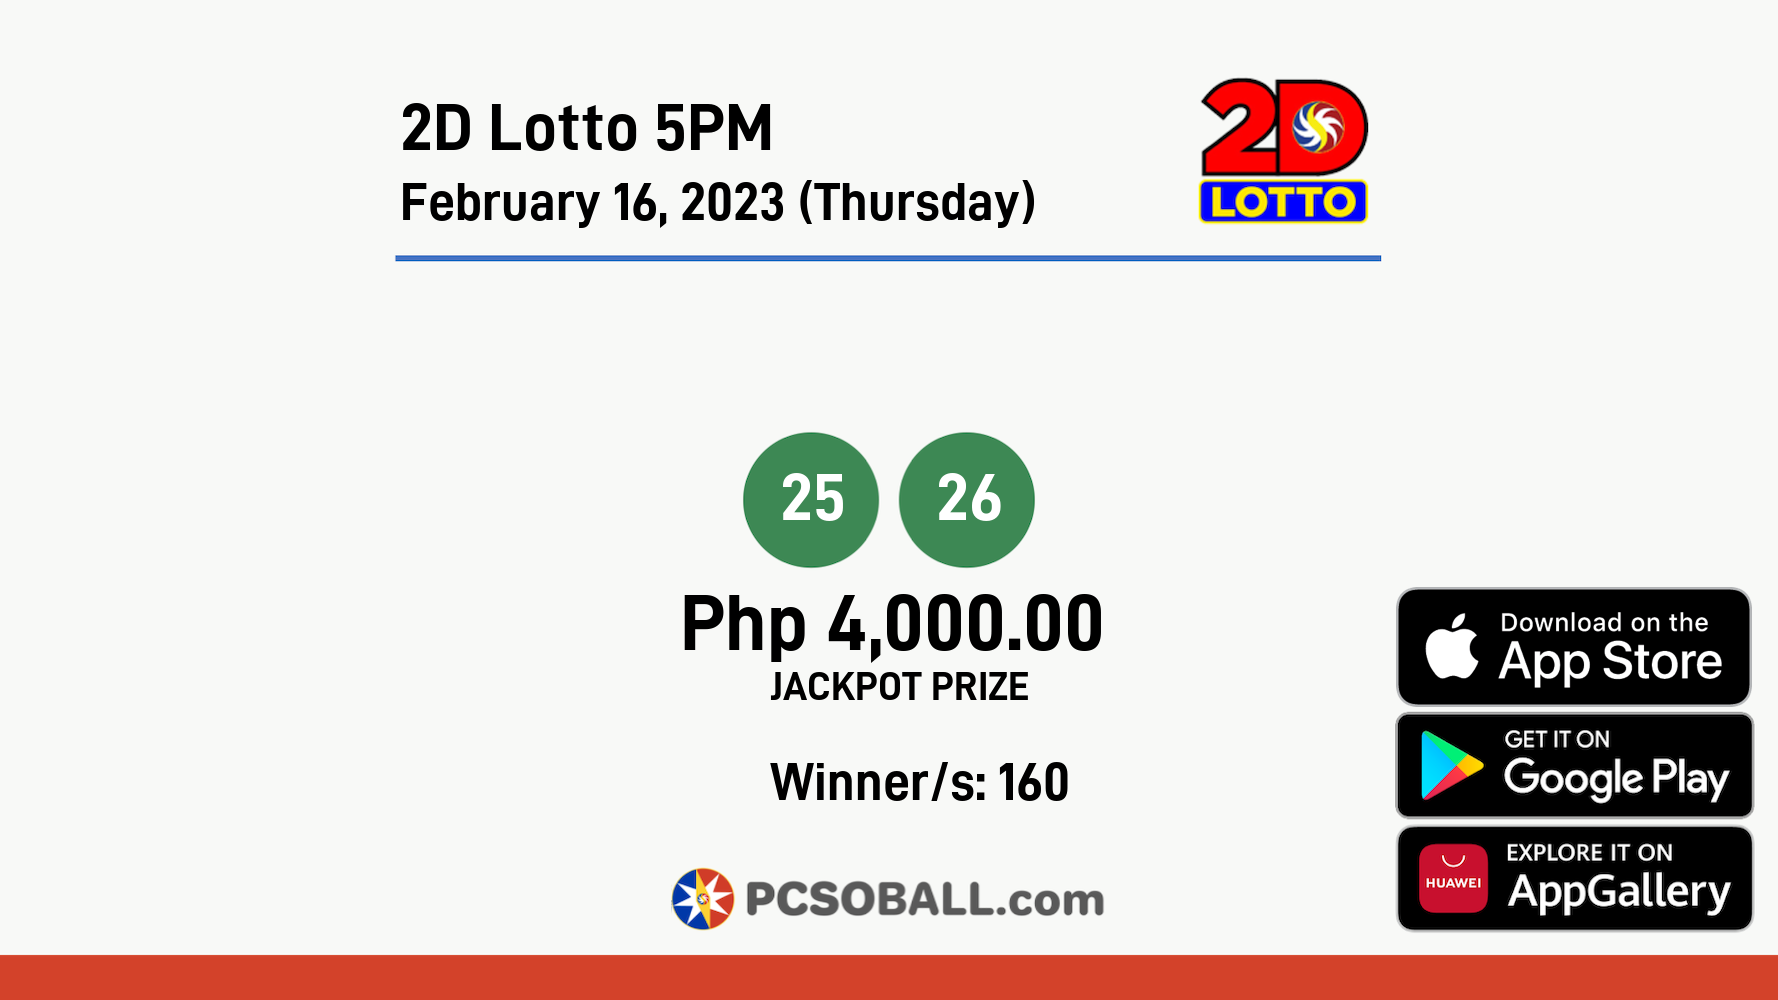 2D Lotto 5PM February 16, 2023 (Thursday) Result